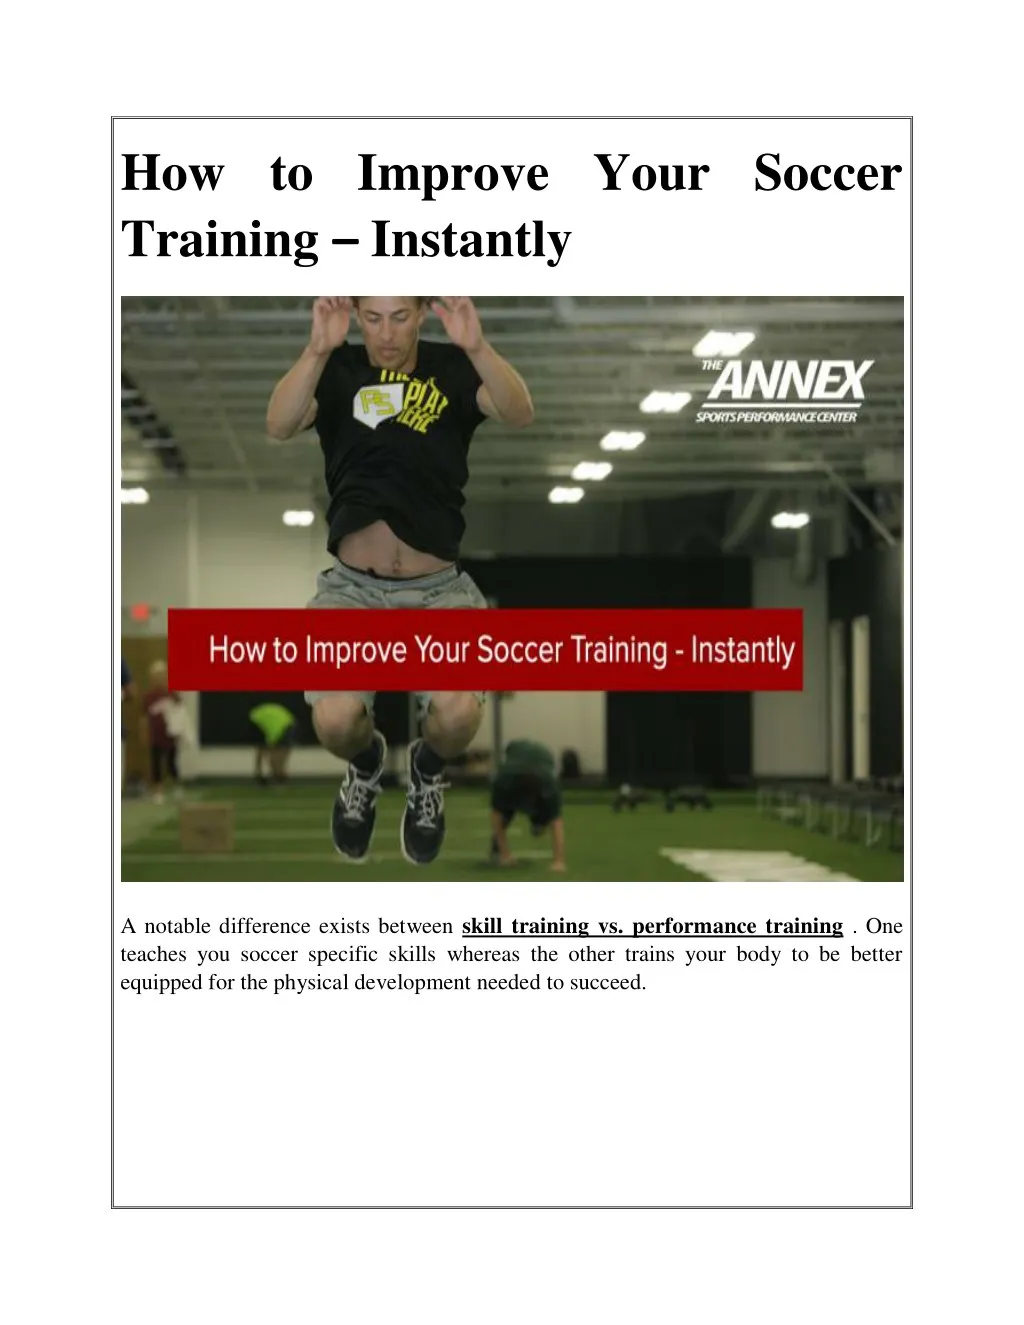 how to improve your soccer training instantly